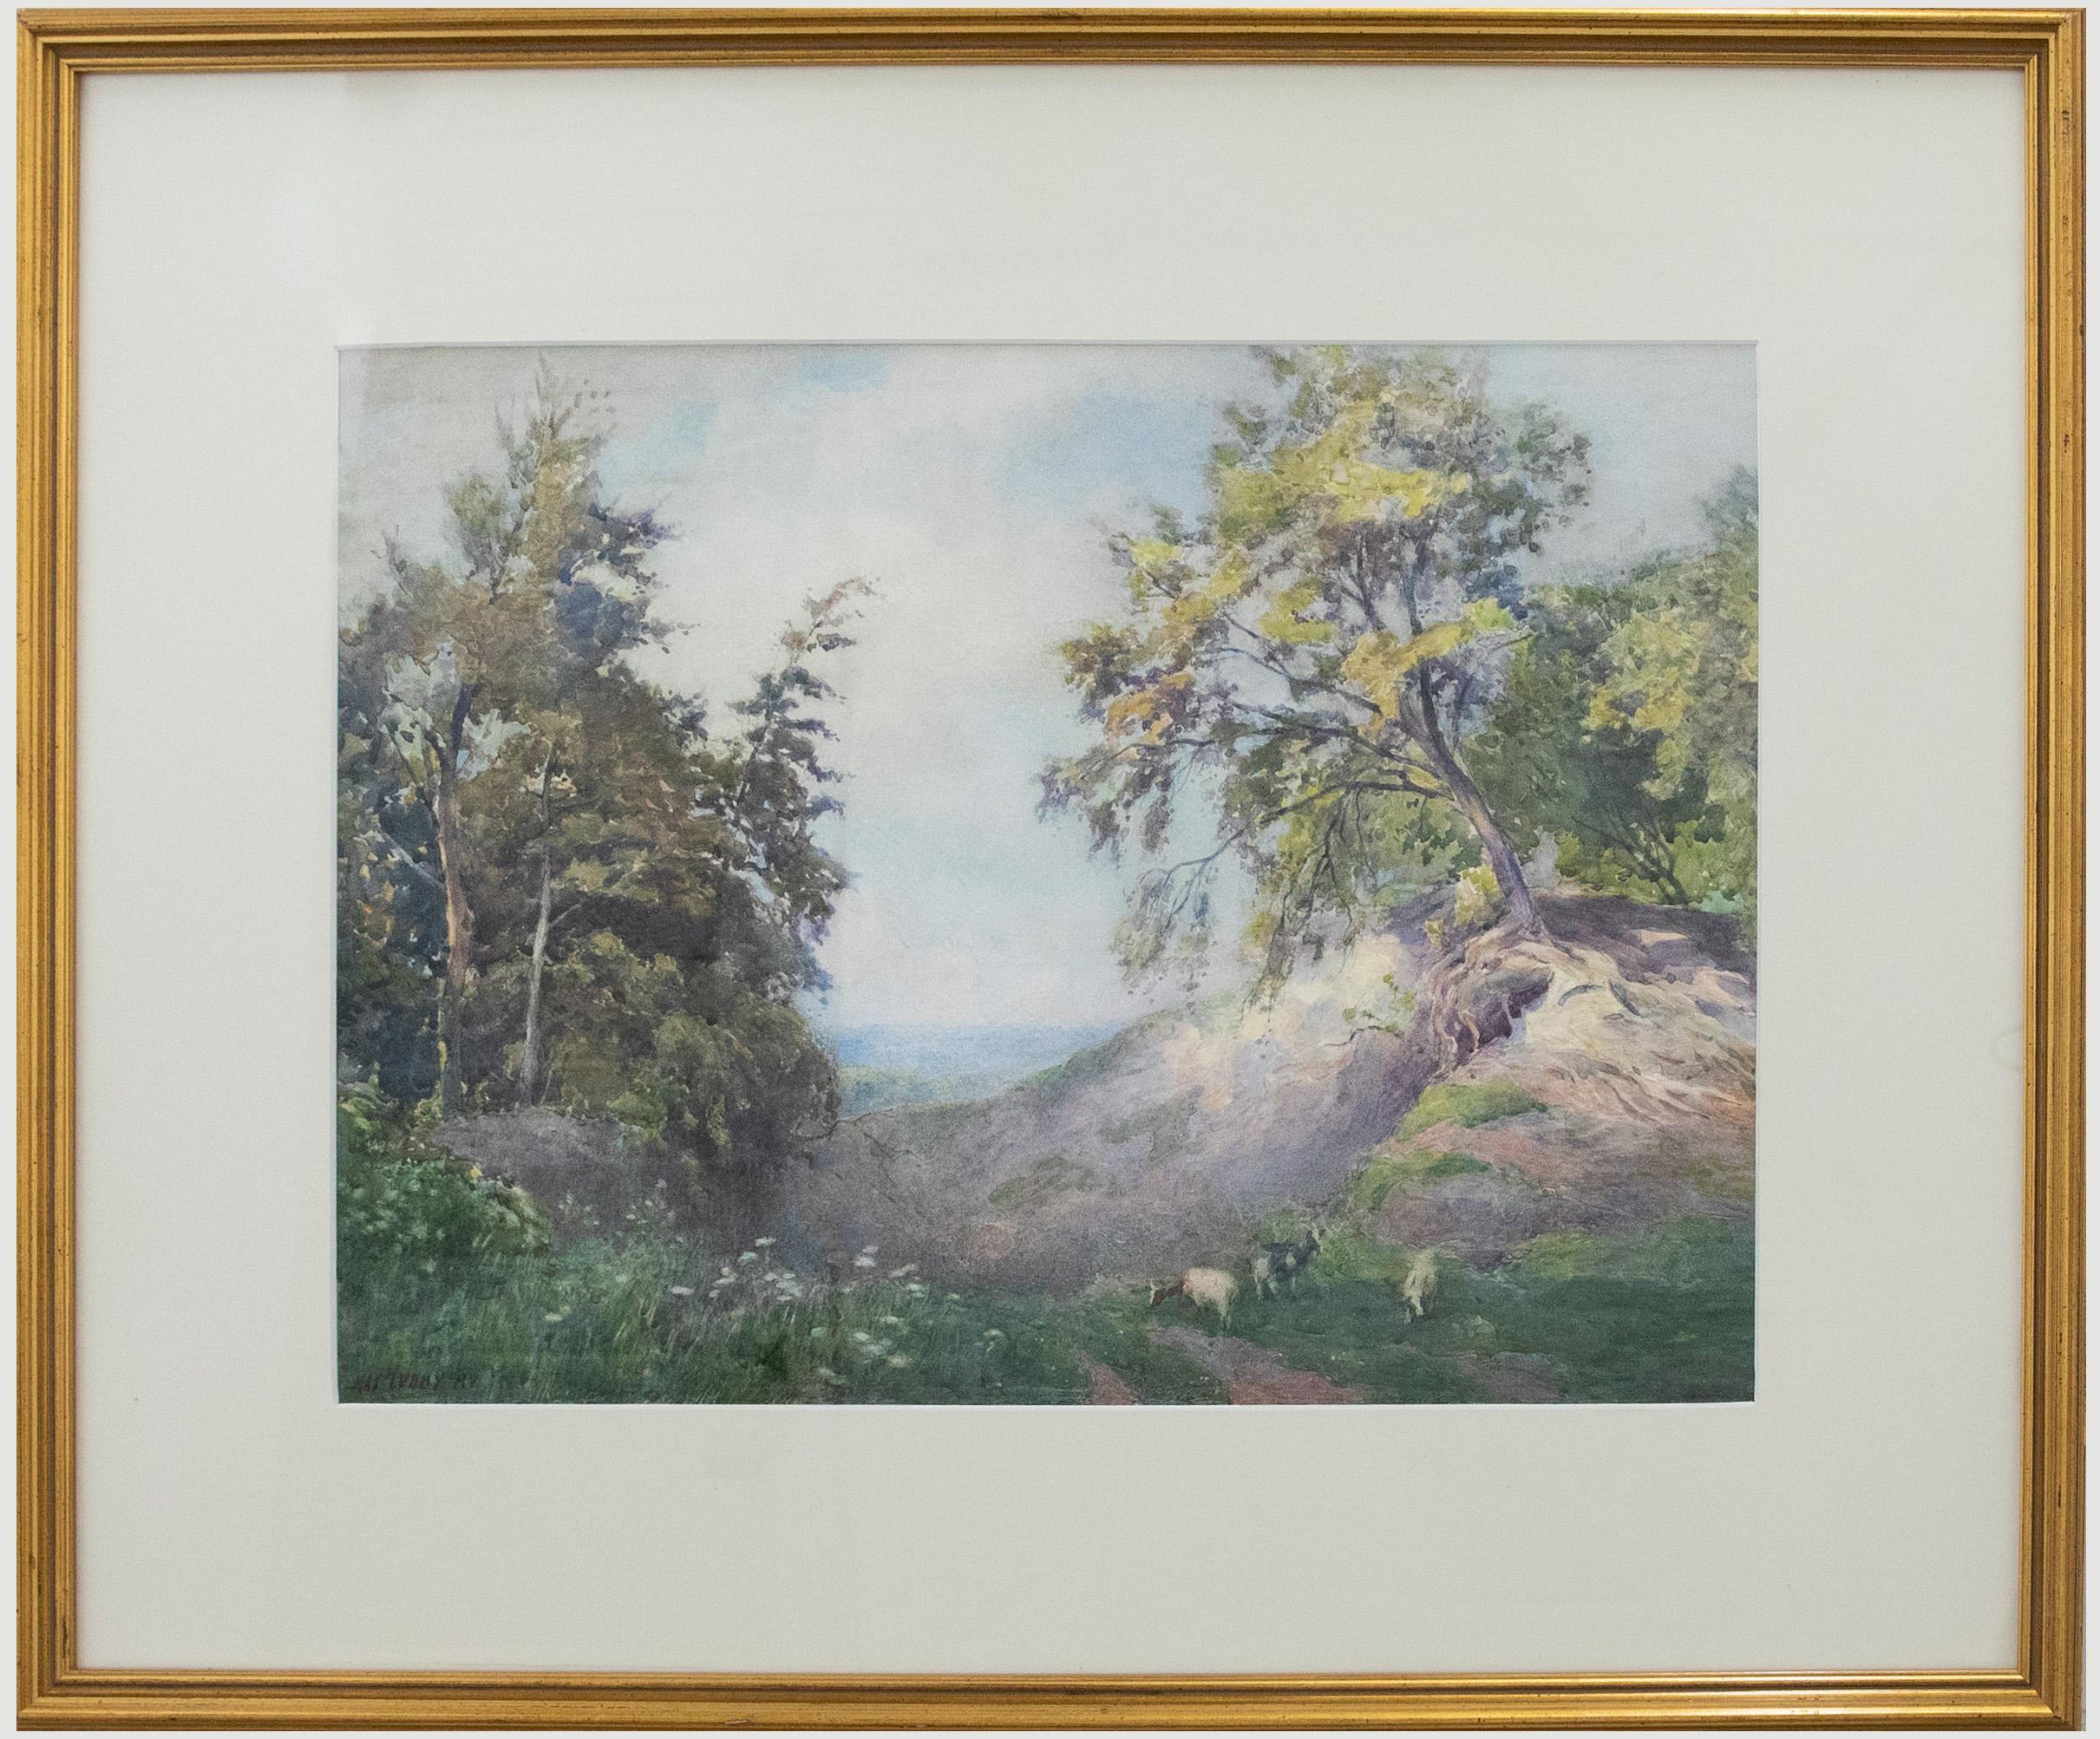 A charming watercolour painting by the artist Max Ludby, depicting a surrey landscape with goats roaming at the edge of a woodland. Well-presented in a white card mount and slim gilt frame. Signed. On watercolour paper. 